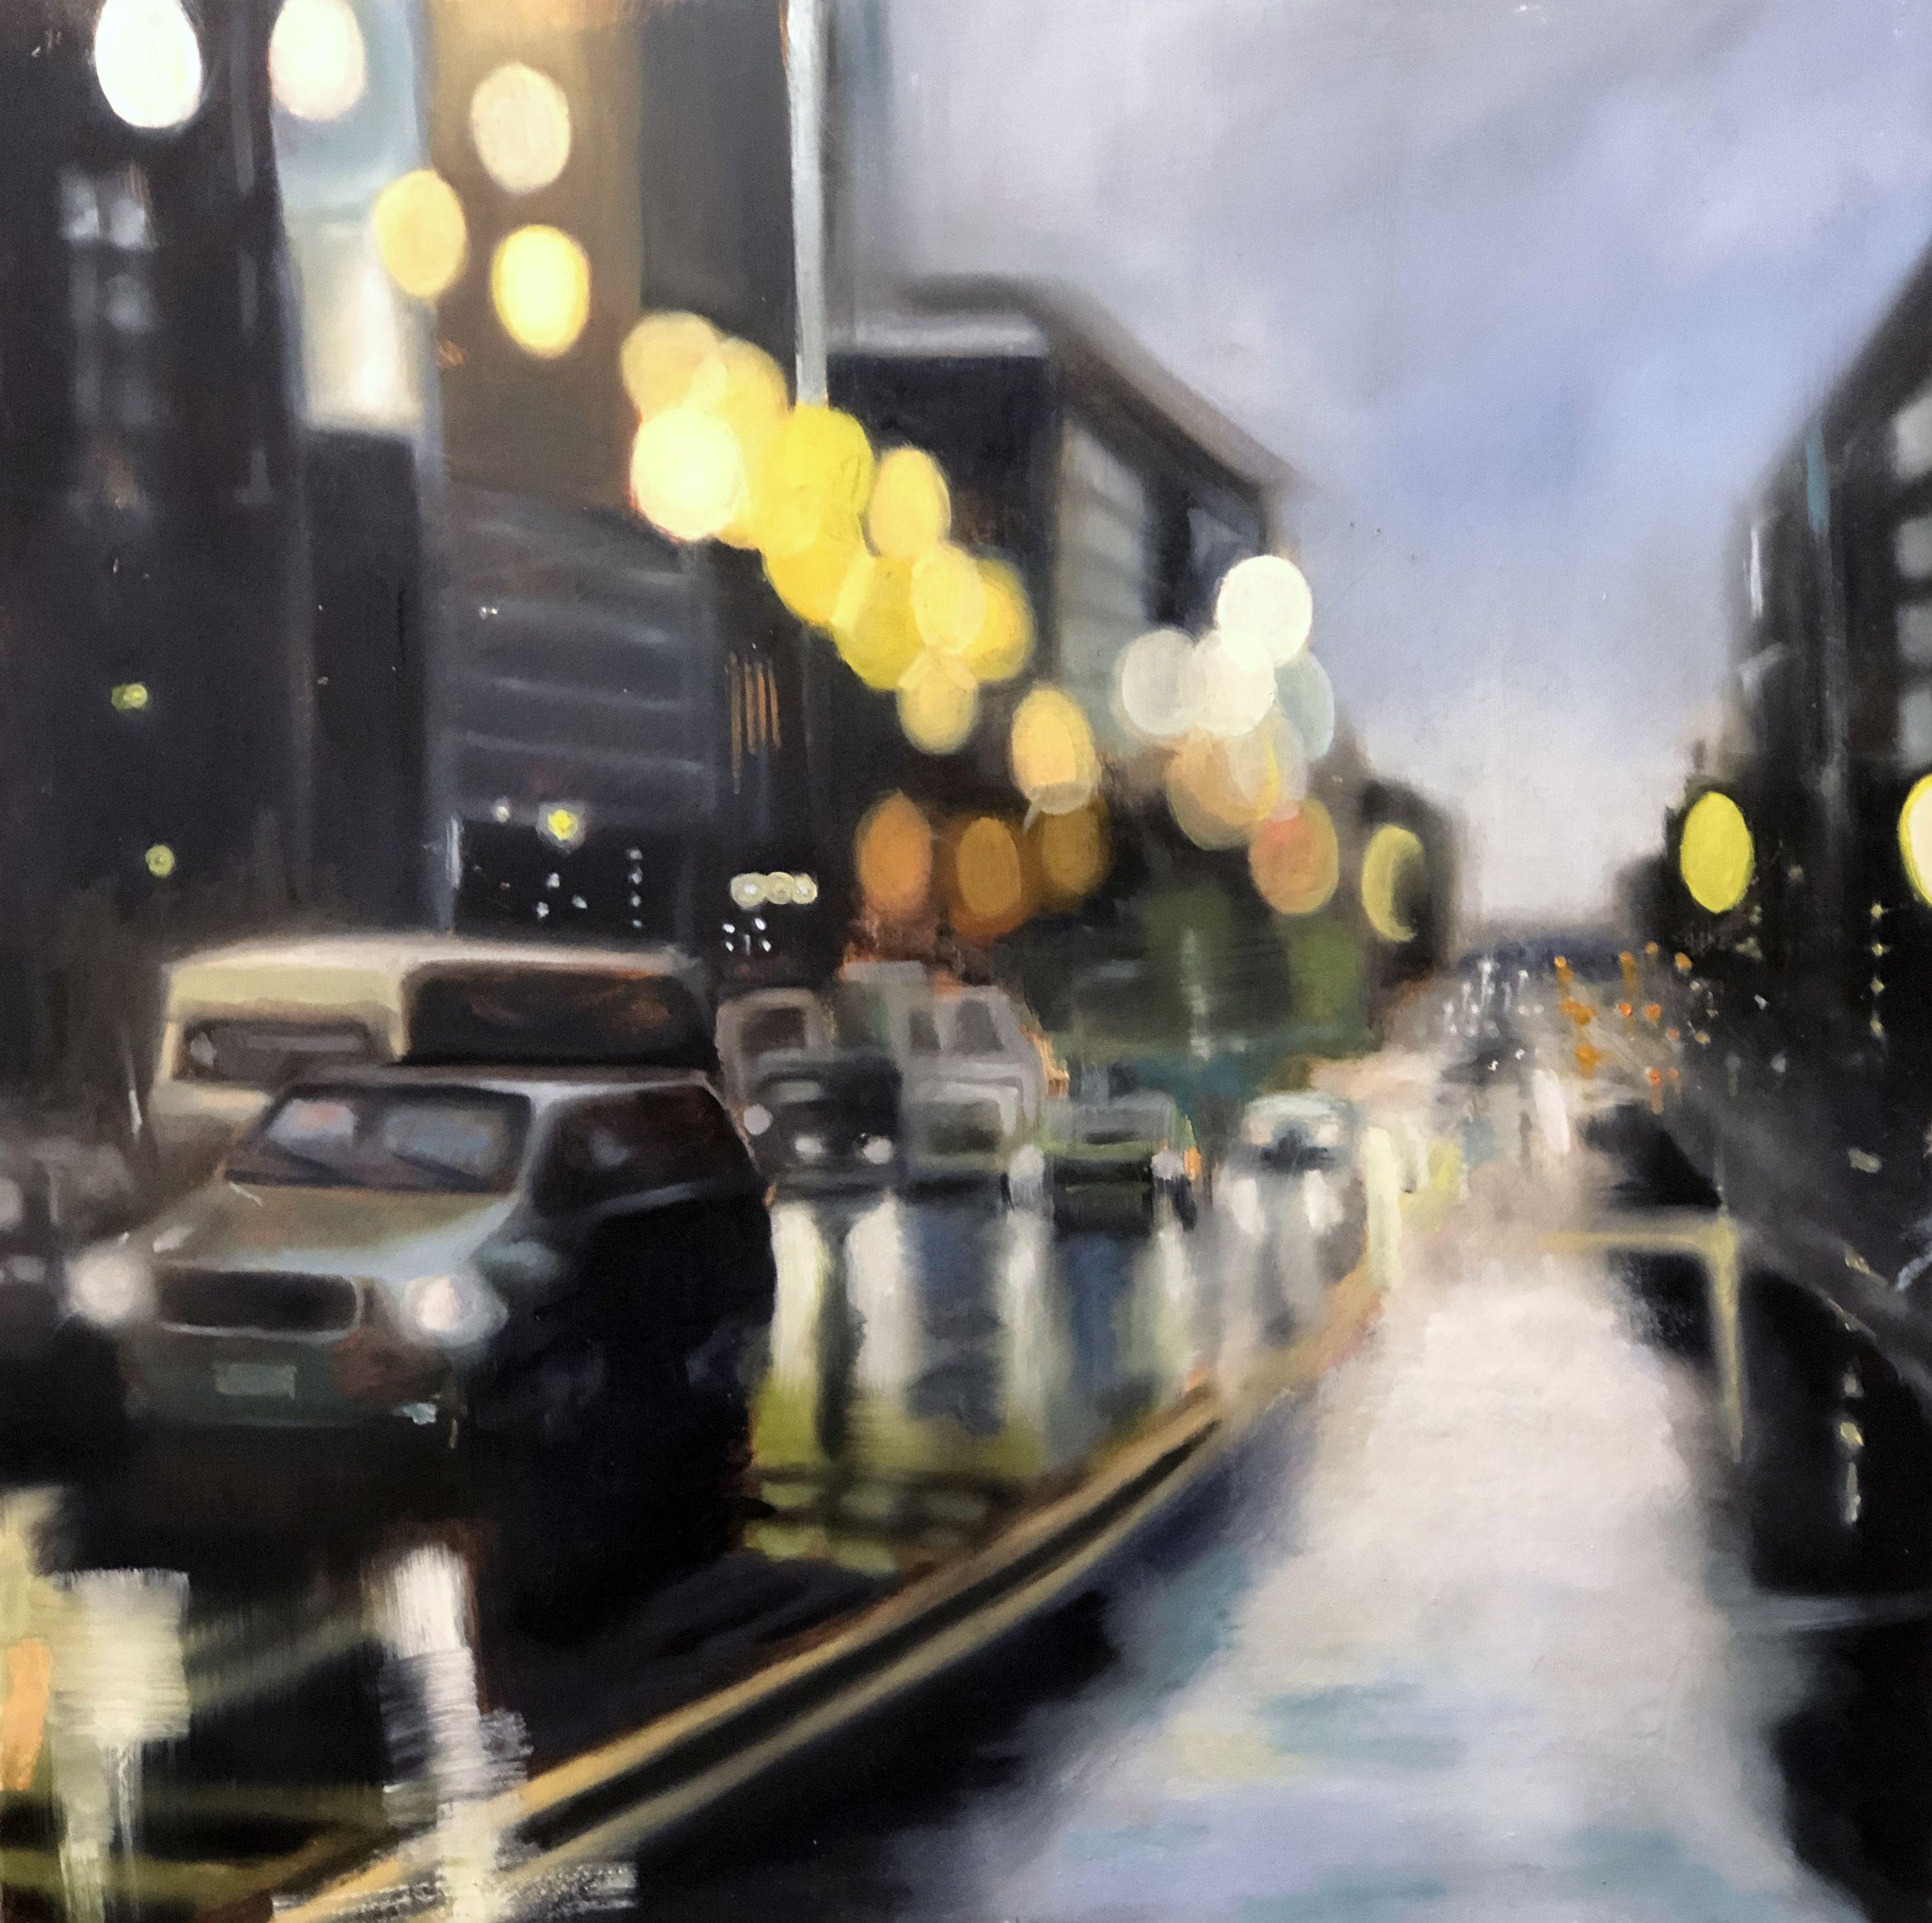 K Street Washington DC - 2019 - Oil on Cradled Board ΓÇô16 H x 16 W x 1.5 Inches and ready to hang    Cradled with a solid wood frame, the panel won't flex, stretch, or warp. The edges are sanded edges to allow for a finished look that is ready to